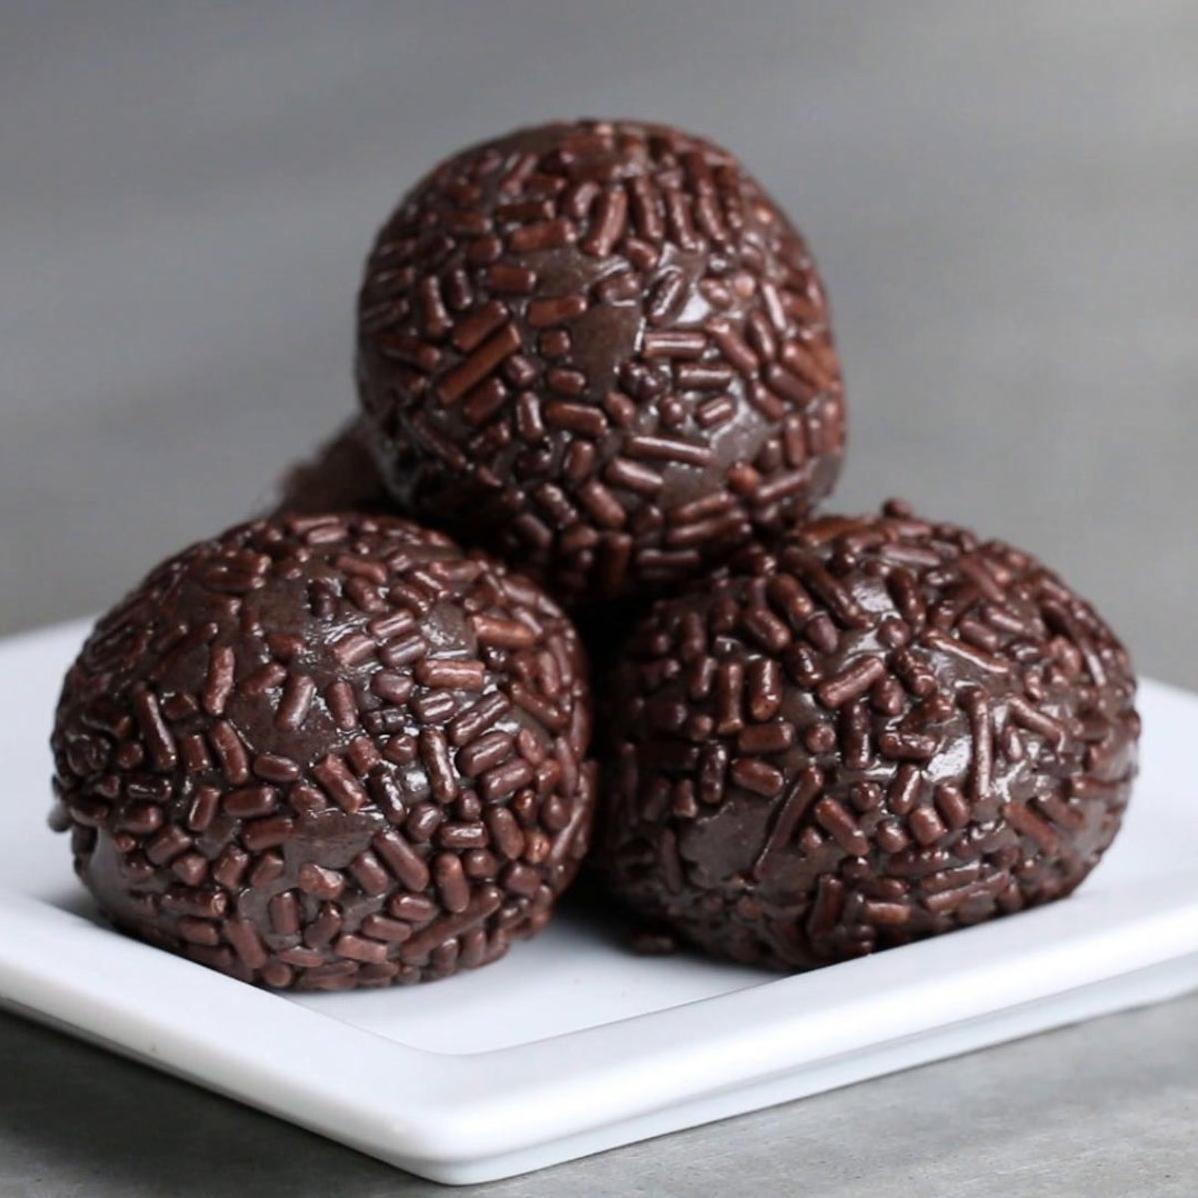  These Brazilian chocolate balls are easy to make and even easier to enjoy!